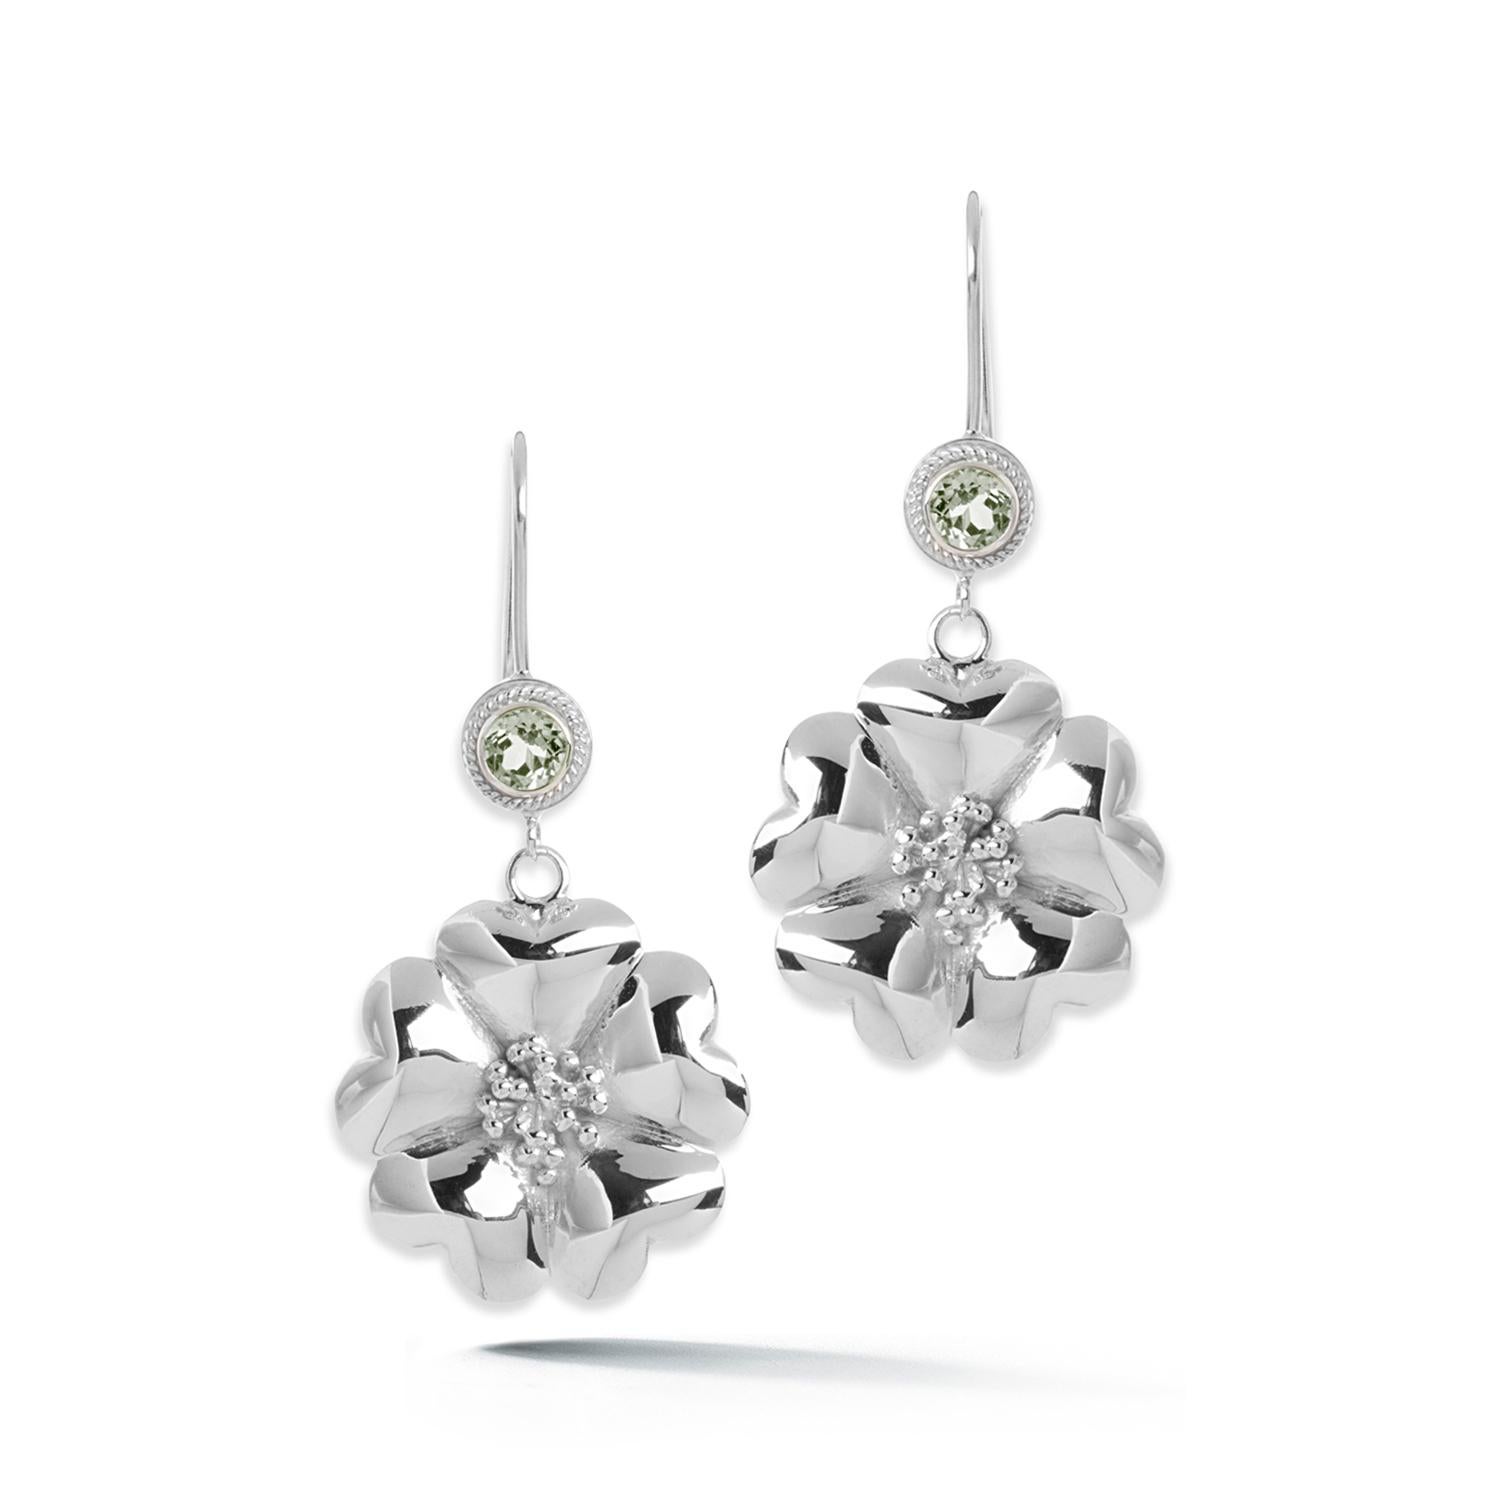 Designed in NYC

.925 Sterling Silver 2 x 5 mm Olive Peridot Blossom Stone Wire Hook Earrings. No matter the season, allow natural beauty to surround you wherever you go. Blossom stone wire hook earrings: 

Sterling silver 
High-polish 
Light-weight